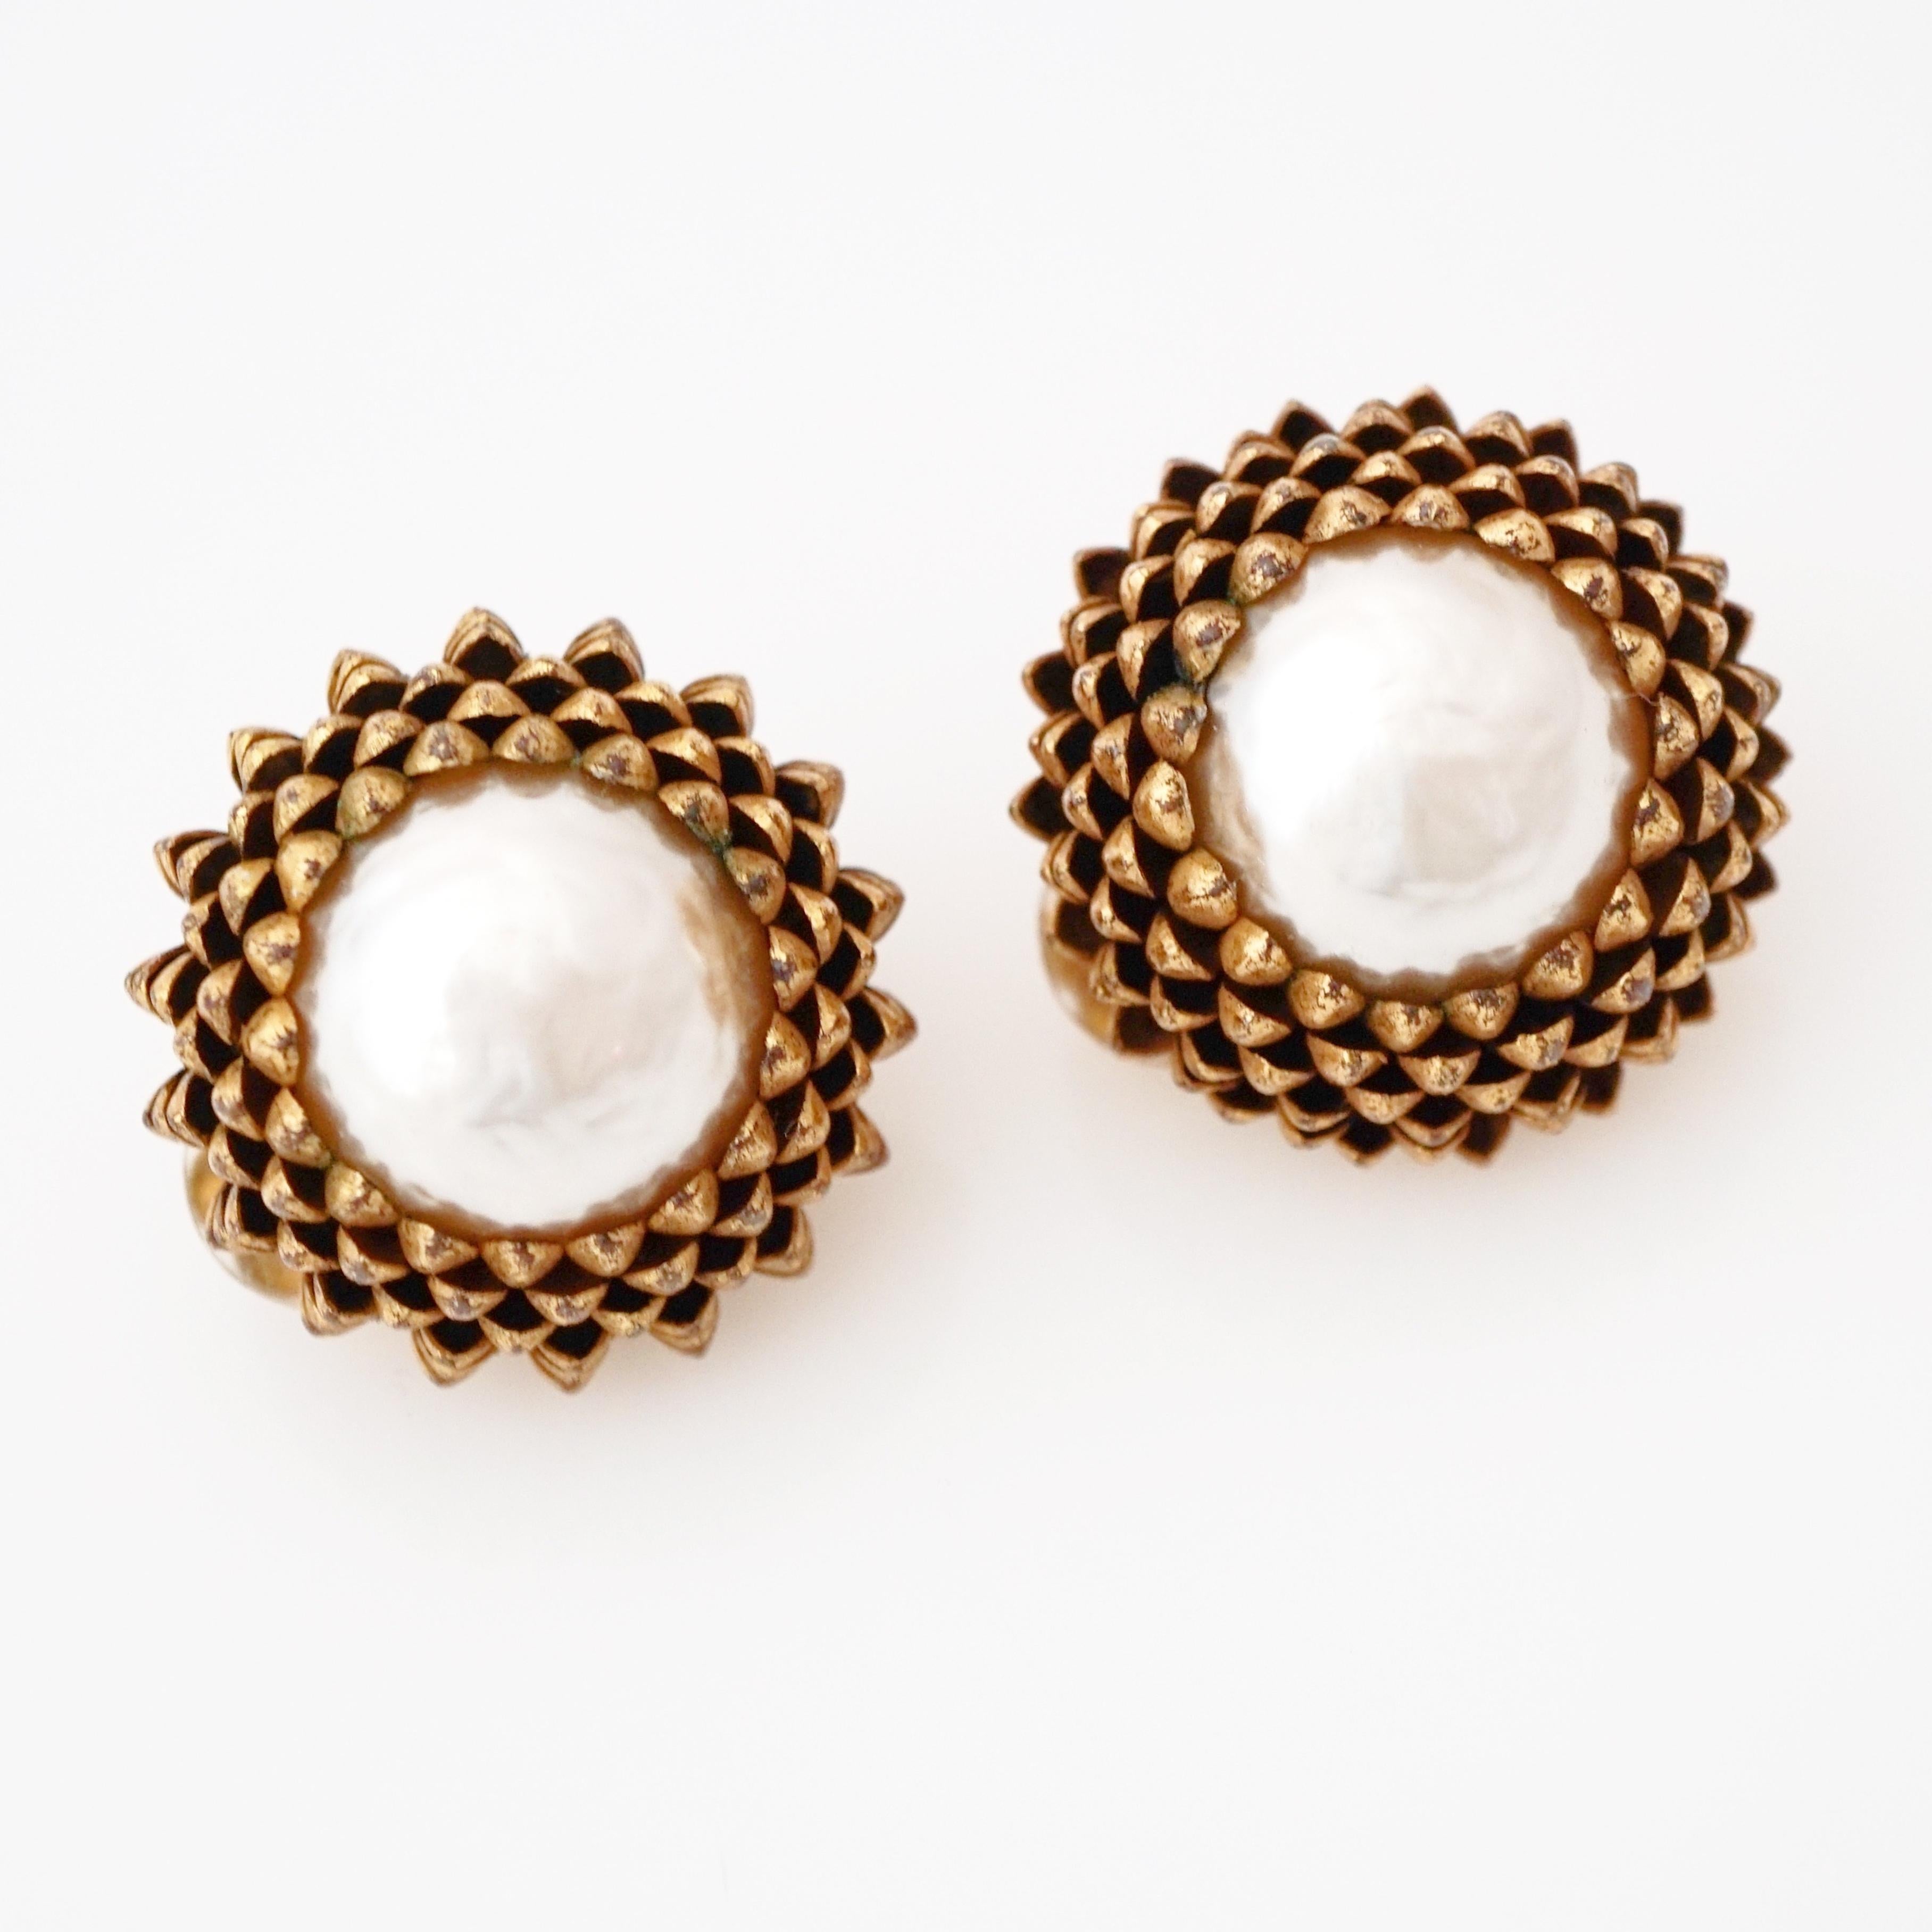 Modern Gold Dome Acorn Earrings With Baroque Pearls By Miriam Haskell, 1950s For Sale